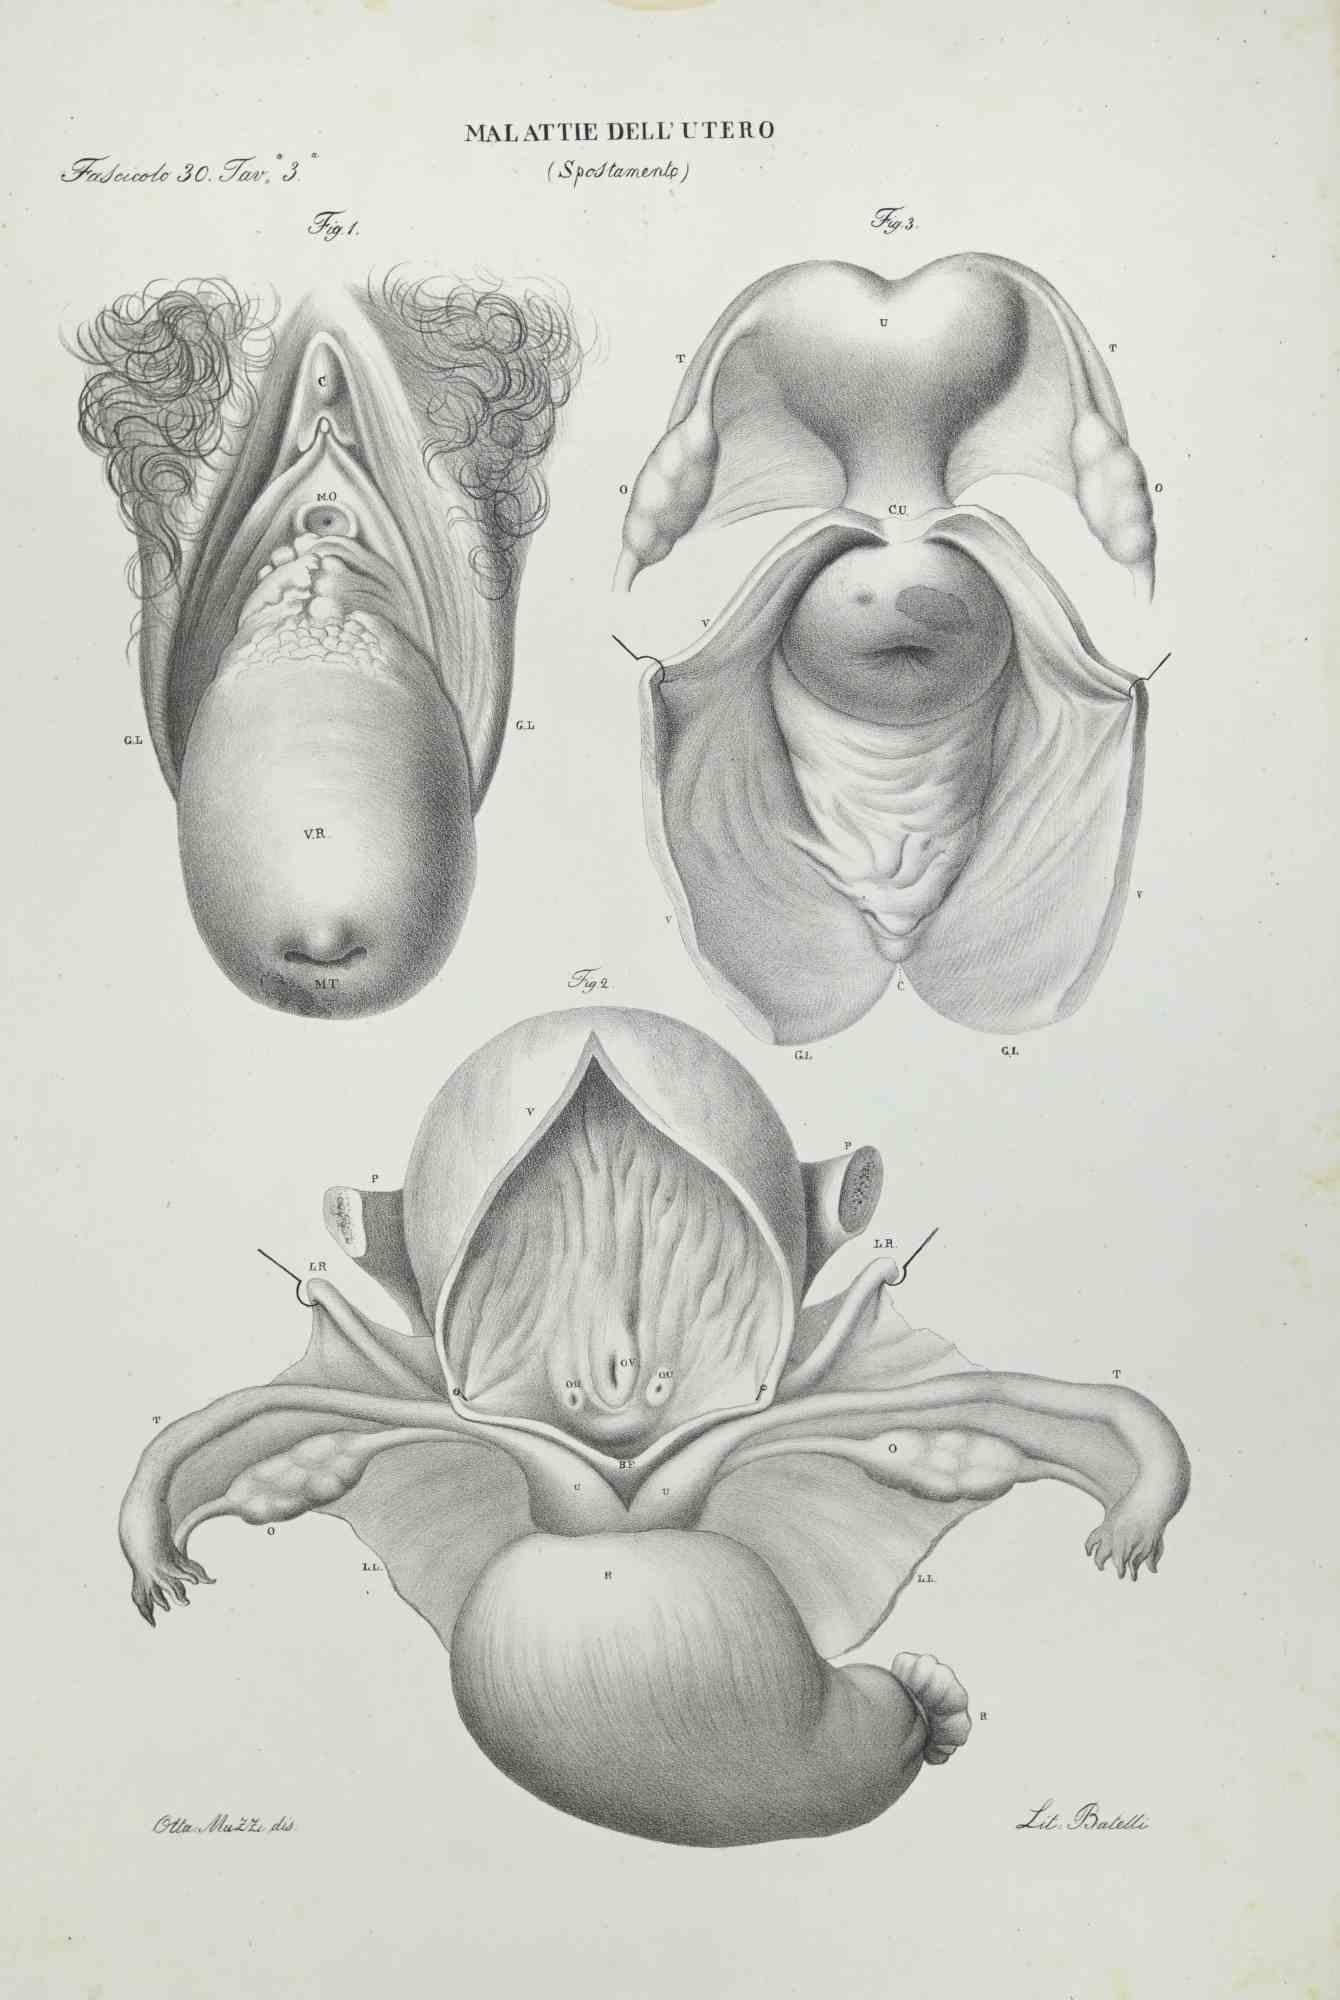 Uterus Diseases is a lithograph hand colored by Ottavio Muzzi for the edition of Antoine Chazal,Human Anatomy, Printers Batelli and Ridolfi, realized in 1843.
Signed on plate on the lower left margin. 

The artwork belongs to the "Atlante Generale